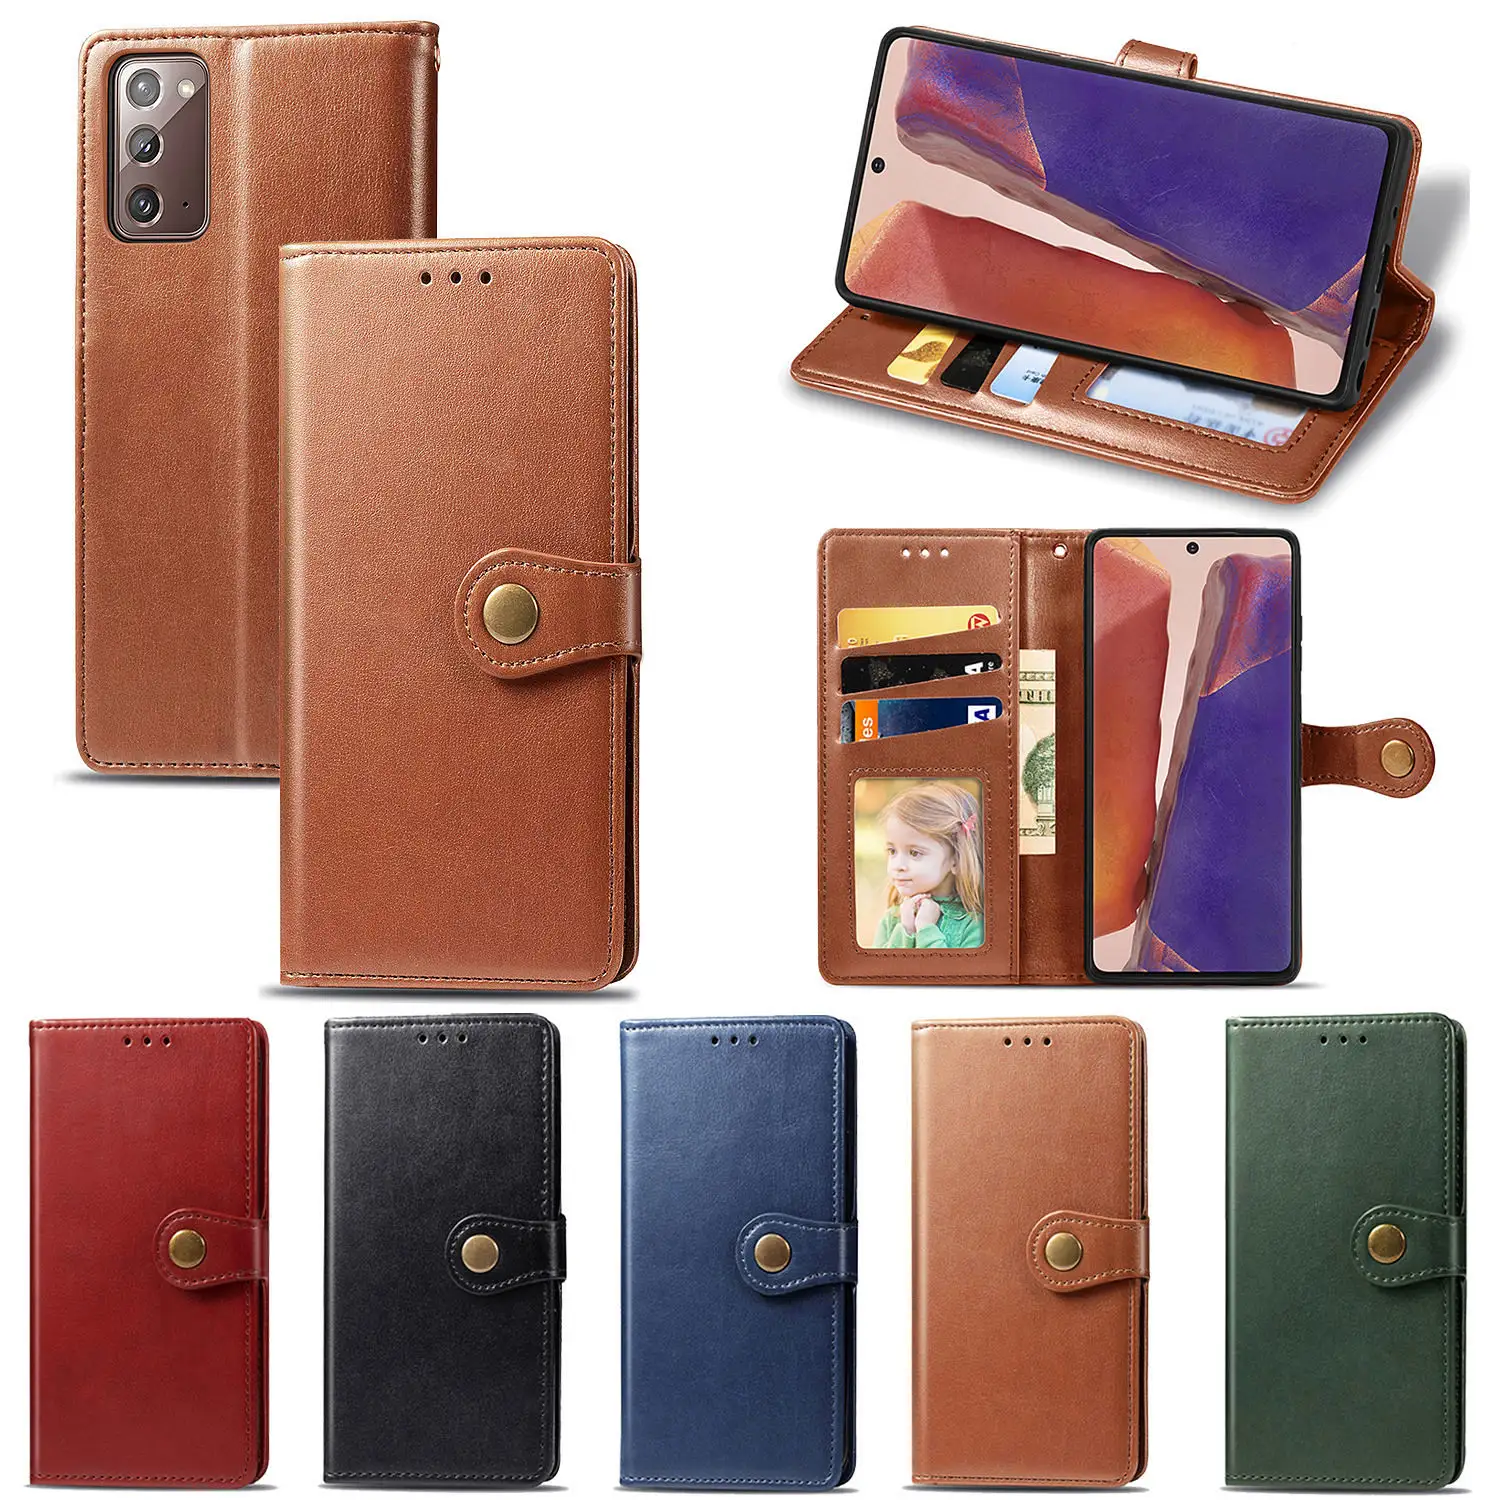 Custom Fashion Magnetic Card Flip Wallet Leather Cell Phone Case For Samsung A51 Note 20 Phone Cover Case